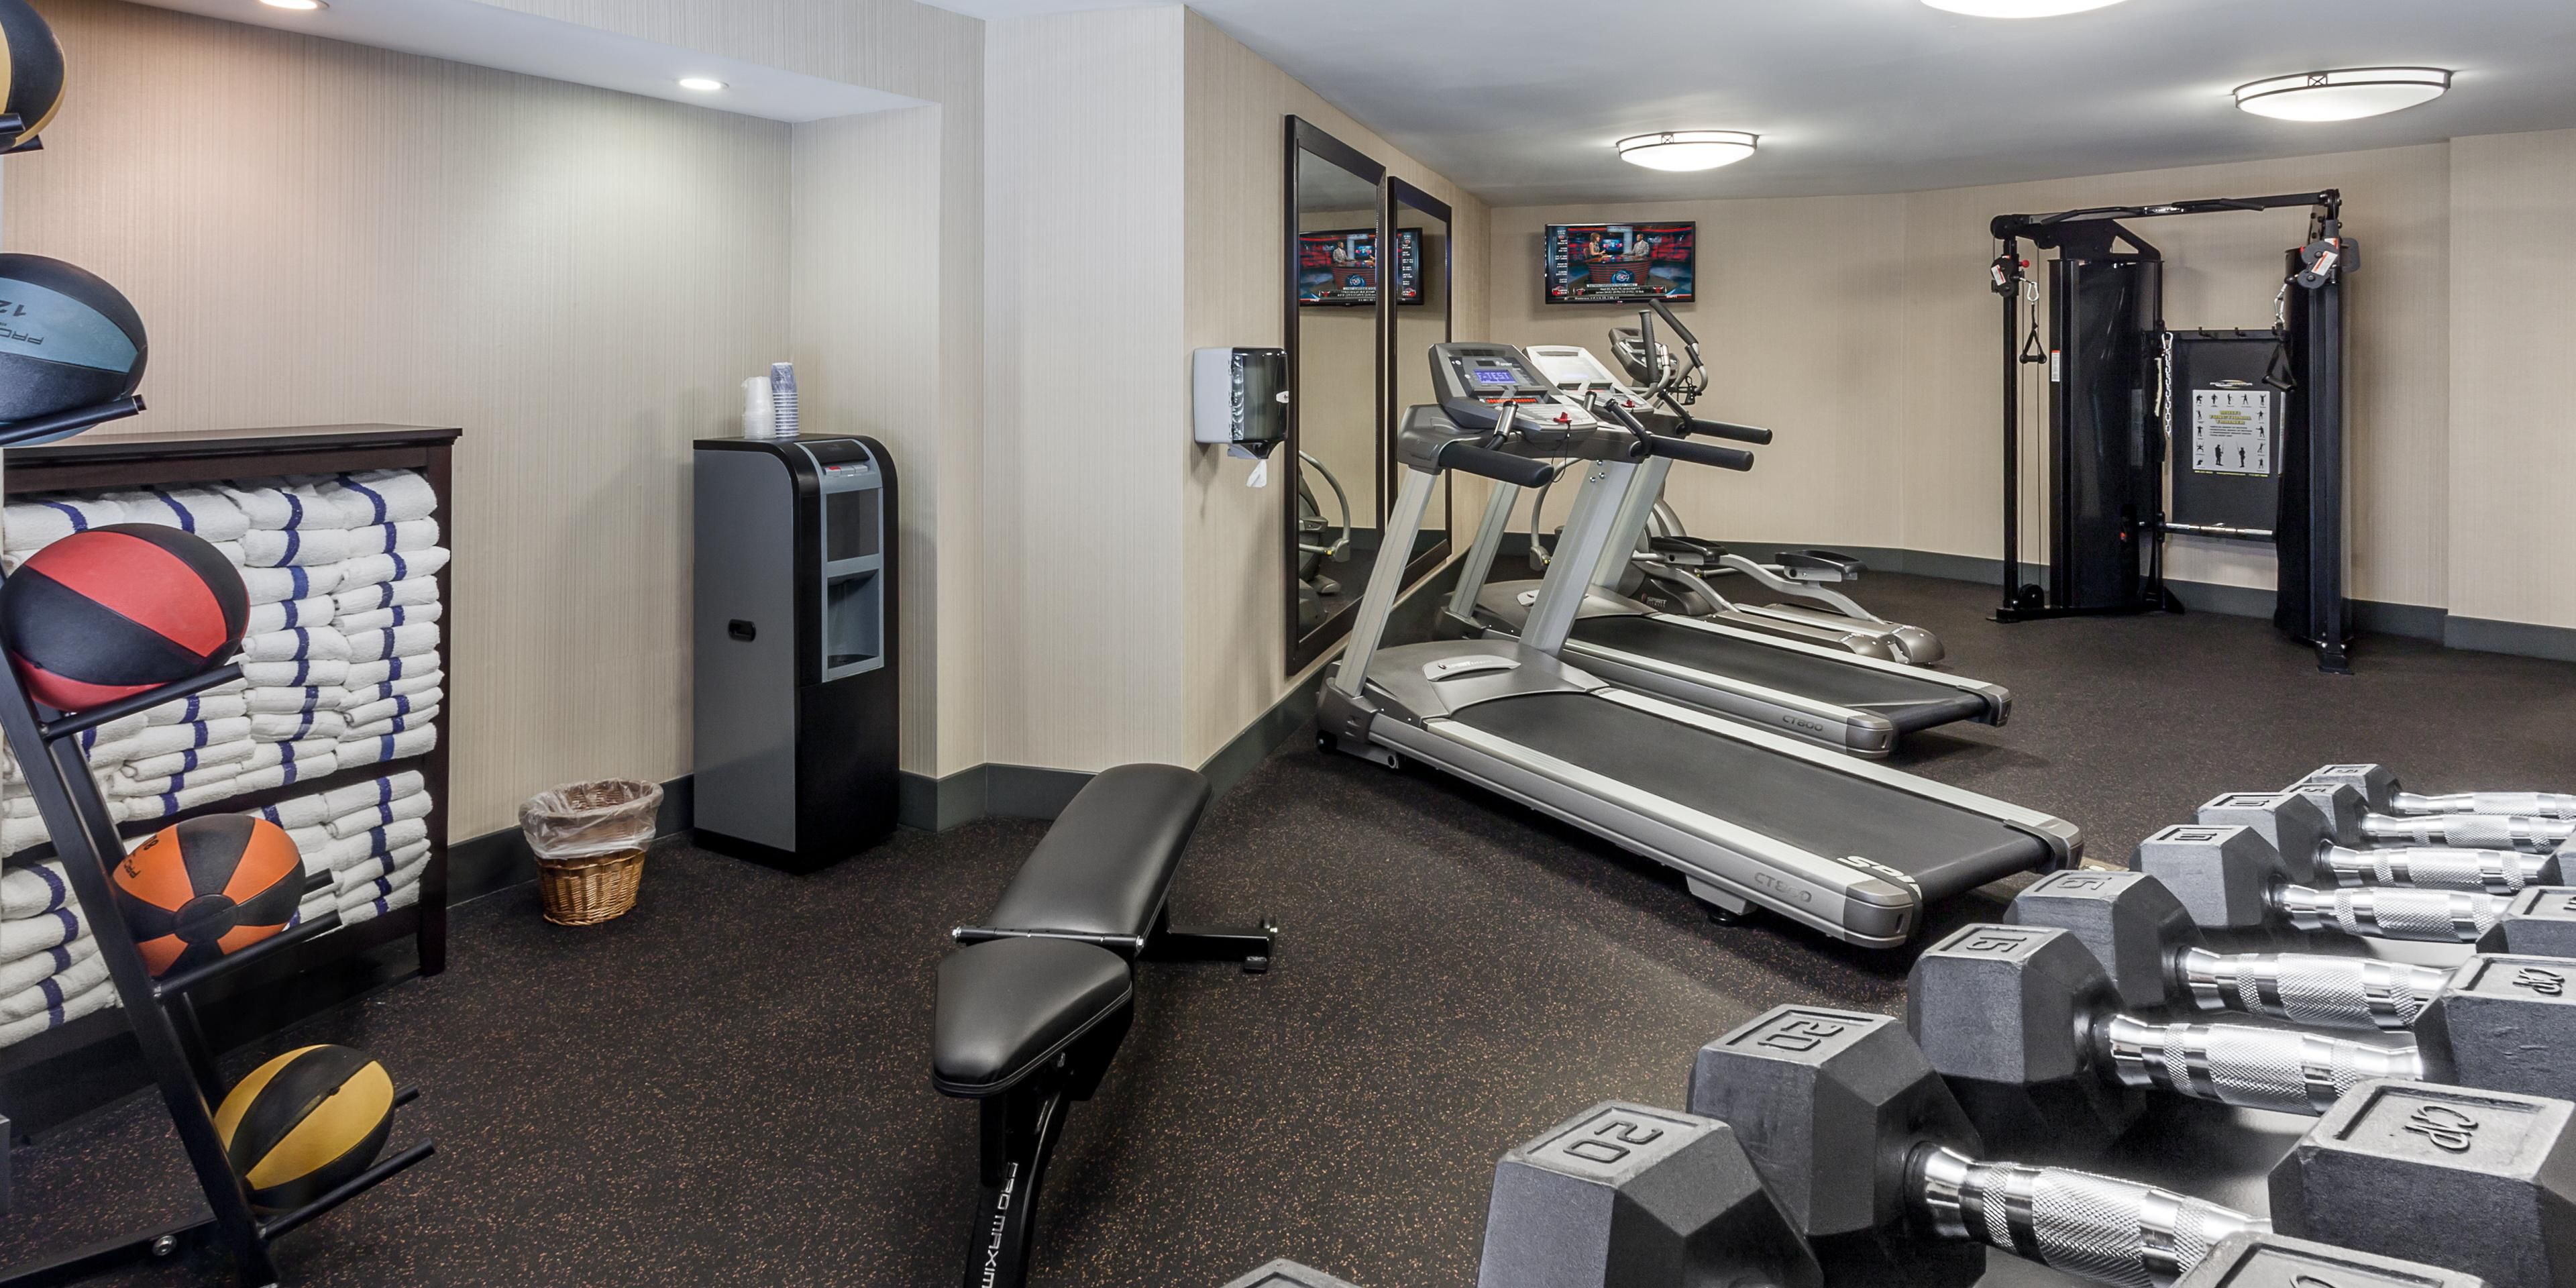 Don't skip a beat on your workout routine when you travel. Our updated fitness center features cardio machines and free weights for your perfect workout!